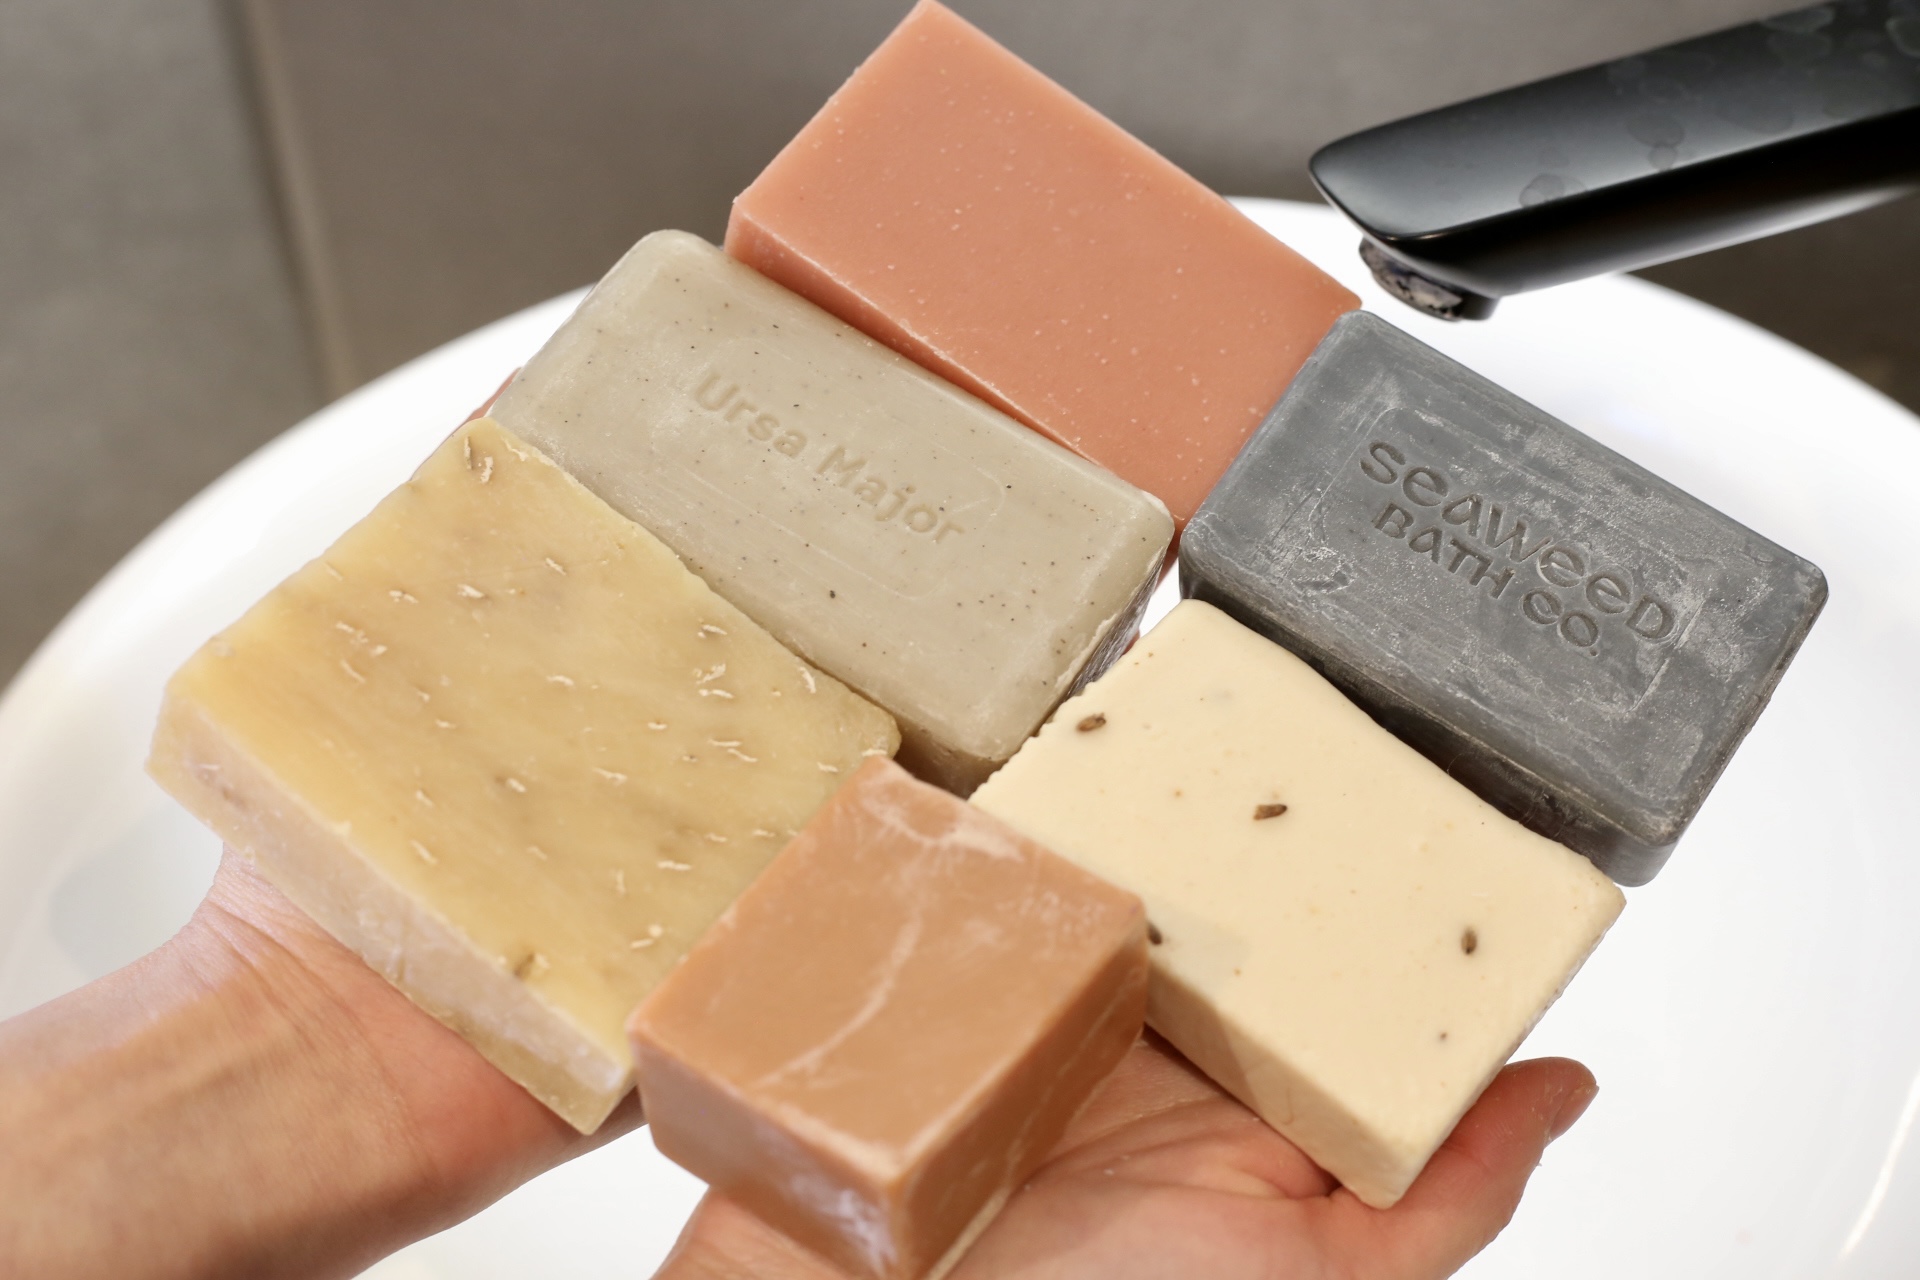 I Tried 7 Best Natural Face Soap Bars. Here’s what I really think